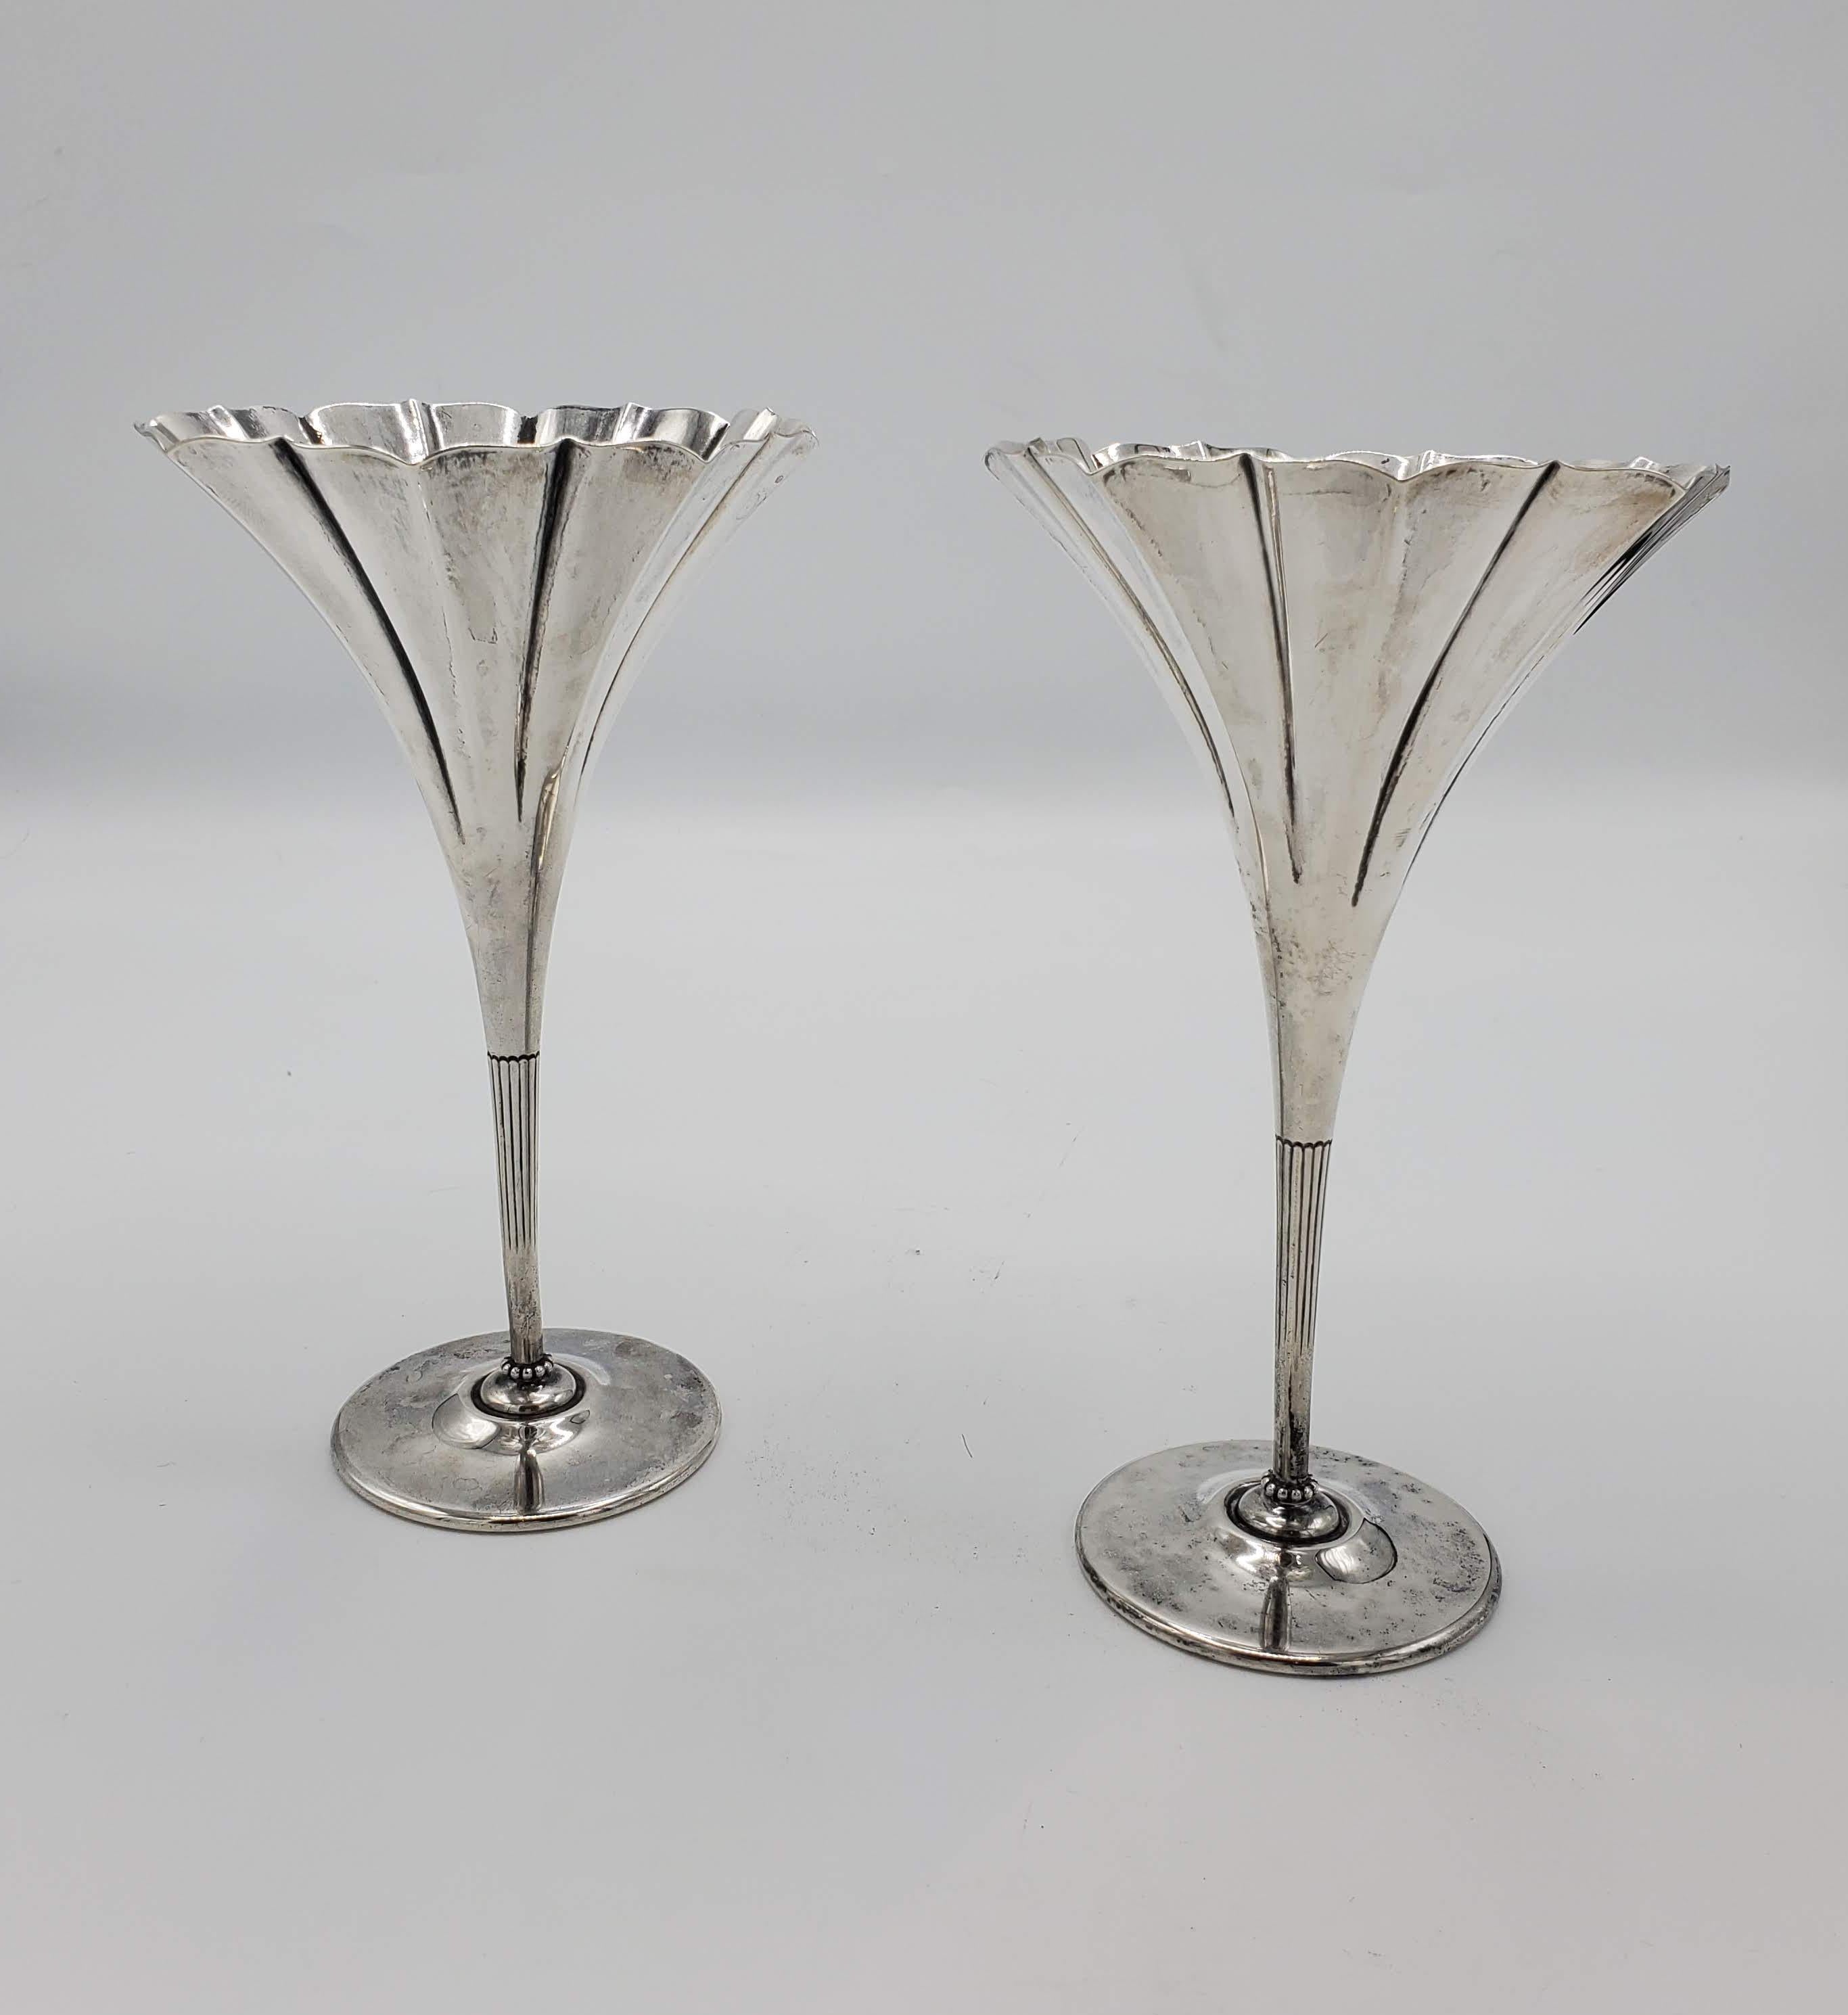 Pair of Small Tiffany & Co. Sterling Silver Art Nouveau Flower Shaped Vases
Two beautiful fluted vases that are in excellent condition. 
Stamped on bottom: 